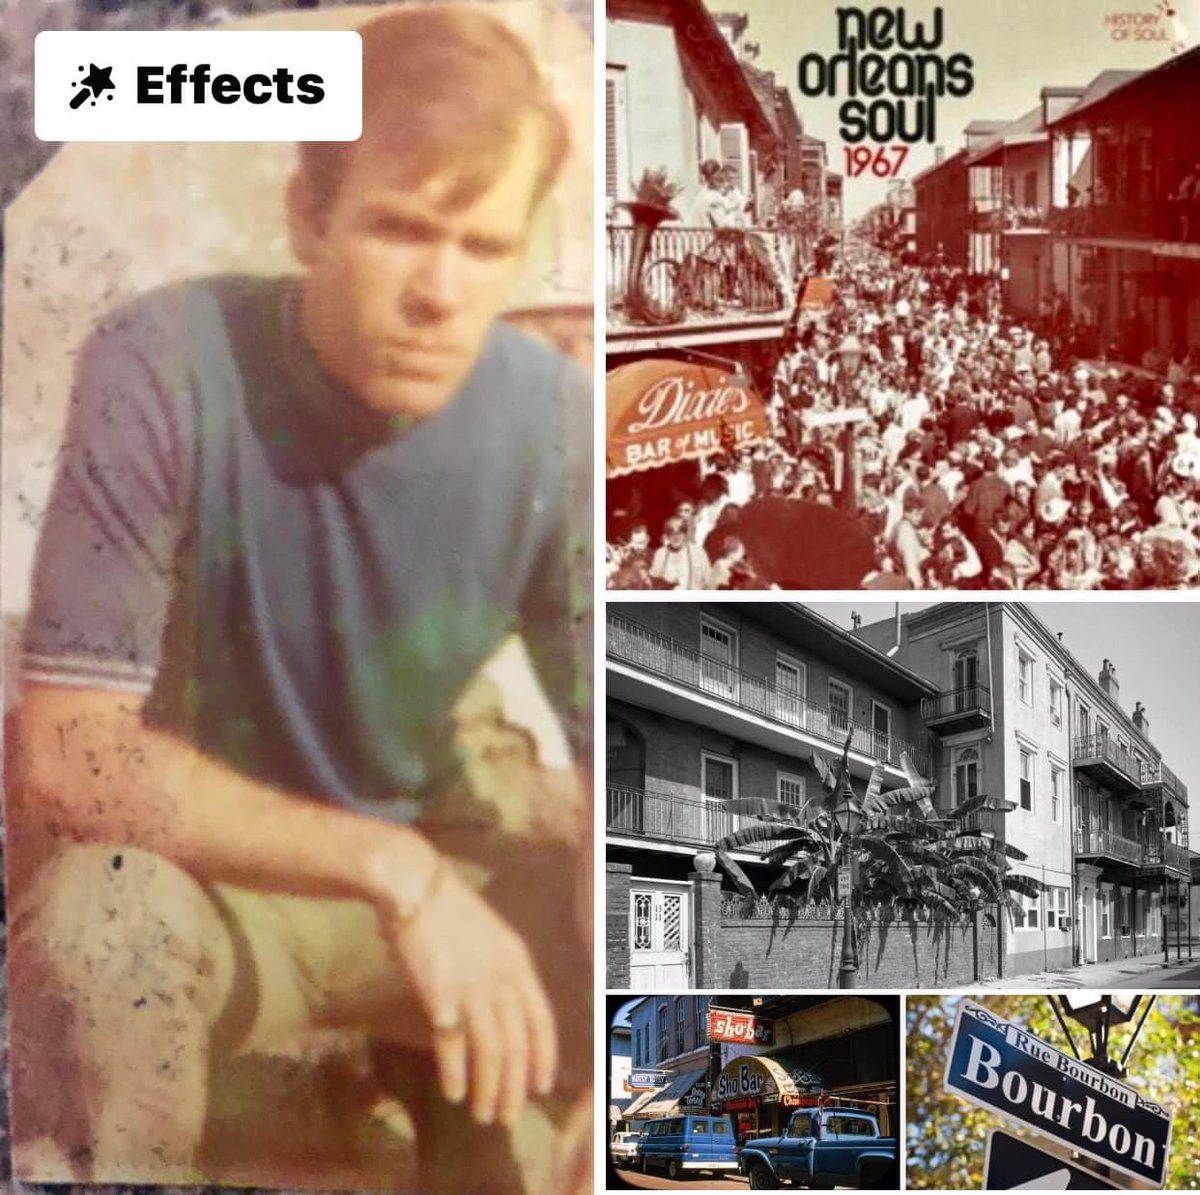 🌊..Late ‘60’s  #NOLA ..Man,I just can’t help but remember.⚓️don’t worry about it Bill, your God Blessed #FrenchQuarters #uptown the Women Love You 💕and some of theses Men just can’t understand”.. youtu.be/8pJnT-HBkw0?si sometimes I think God forgot to tell all them Ladies”..LOL